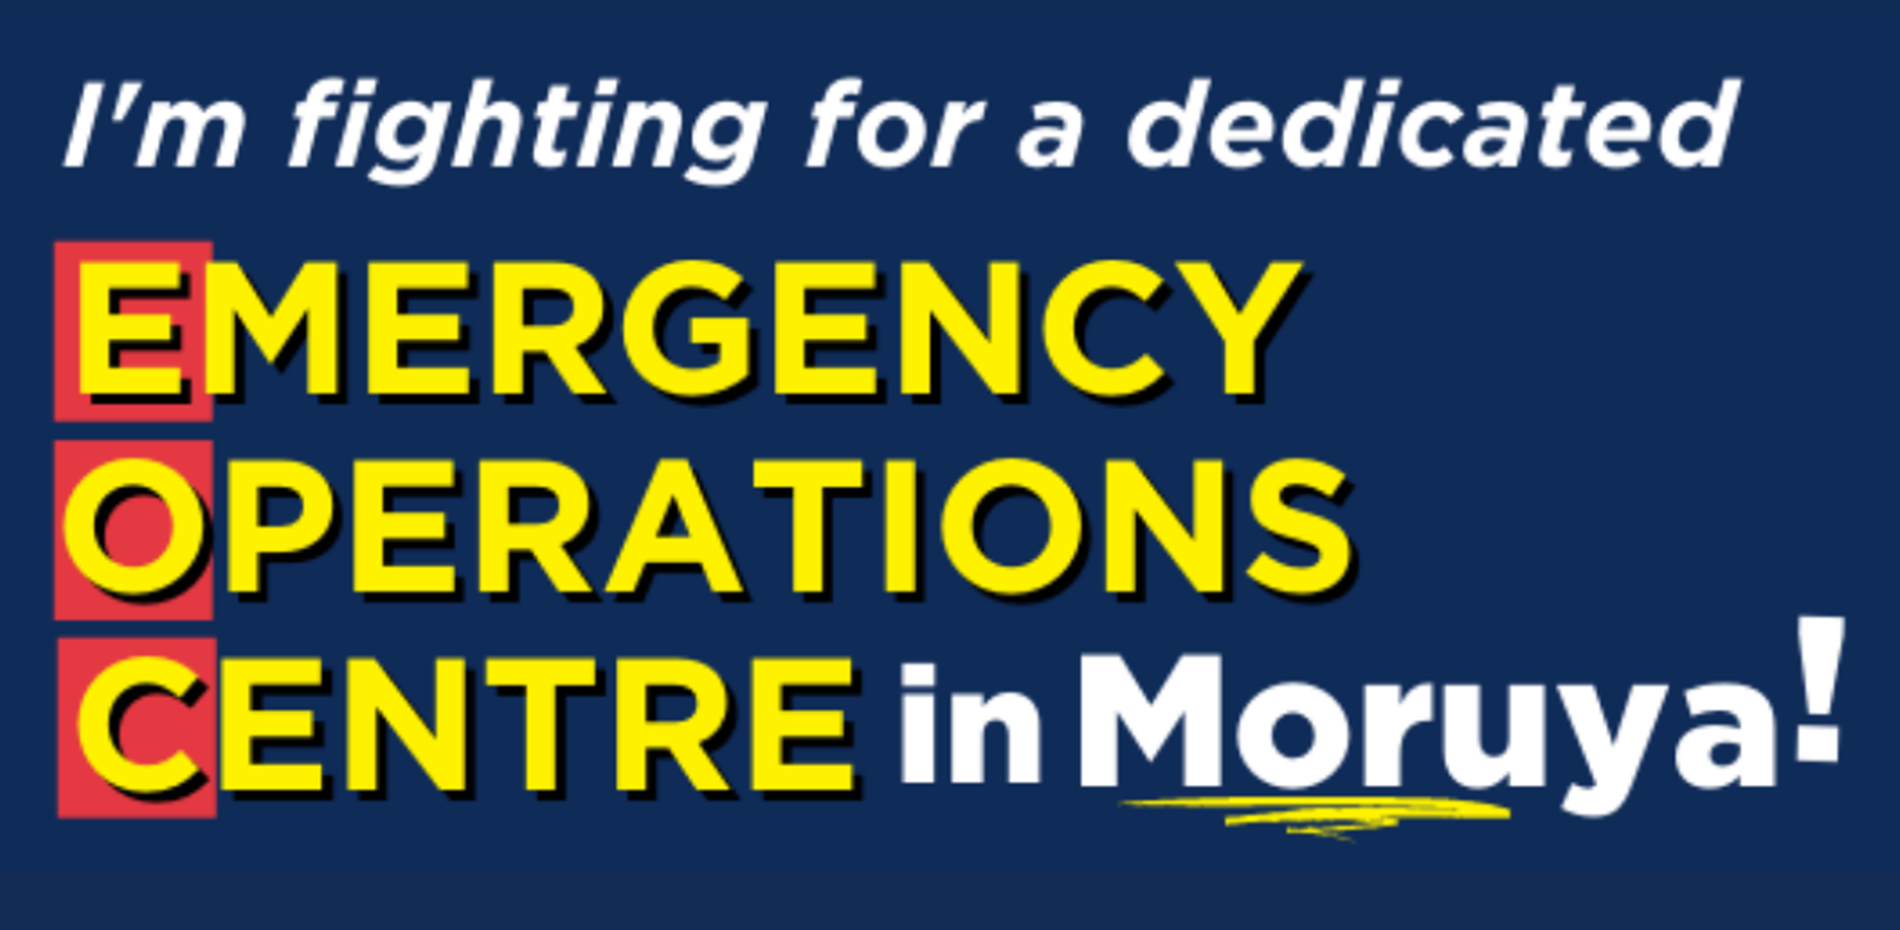 Parliamentary speech: Fighting for a dedicated Emergency Operations Centre in Moruya Main Image